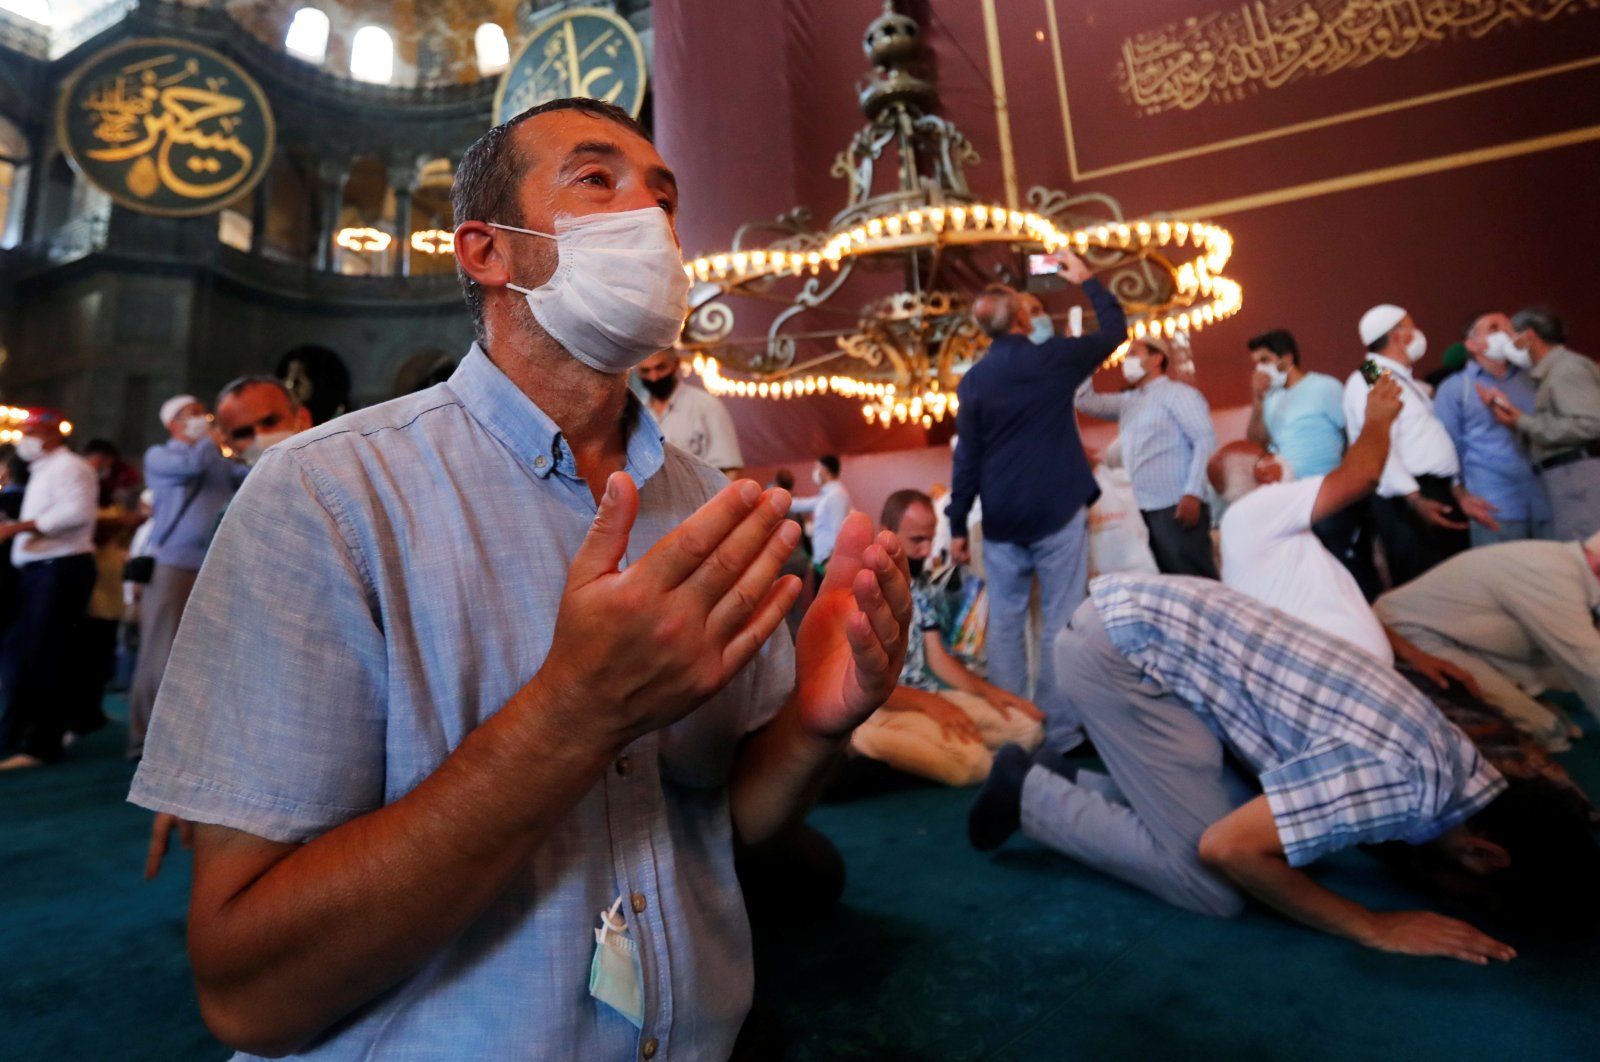 People pray as they visit Hagia Sophia Grand Mosque after Friday prayers, in Istanbul, July 24, 2020. (REUTERS Photo)